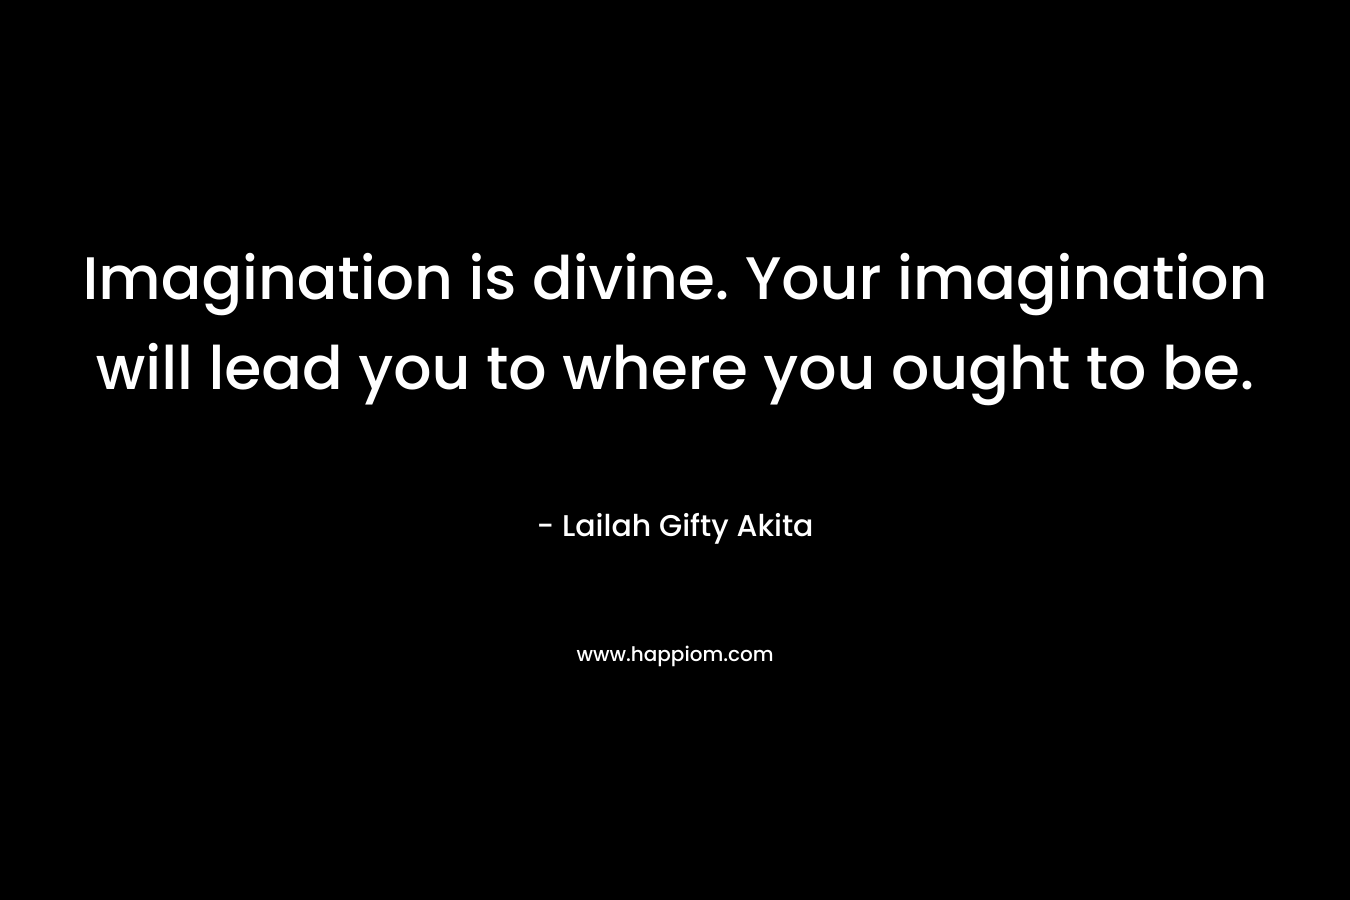 Imagination is divine. Your imagination will lead you to where you ought to be.